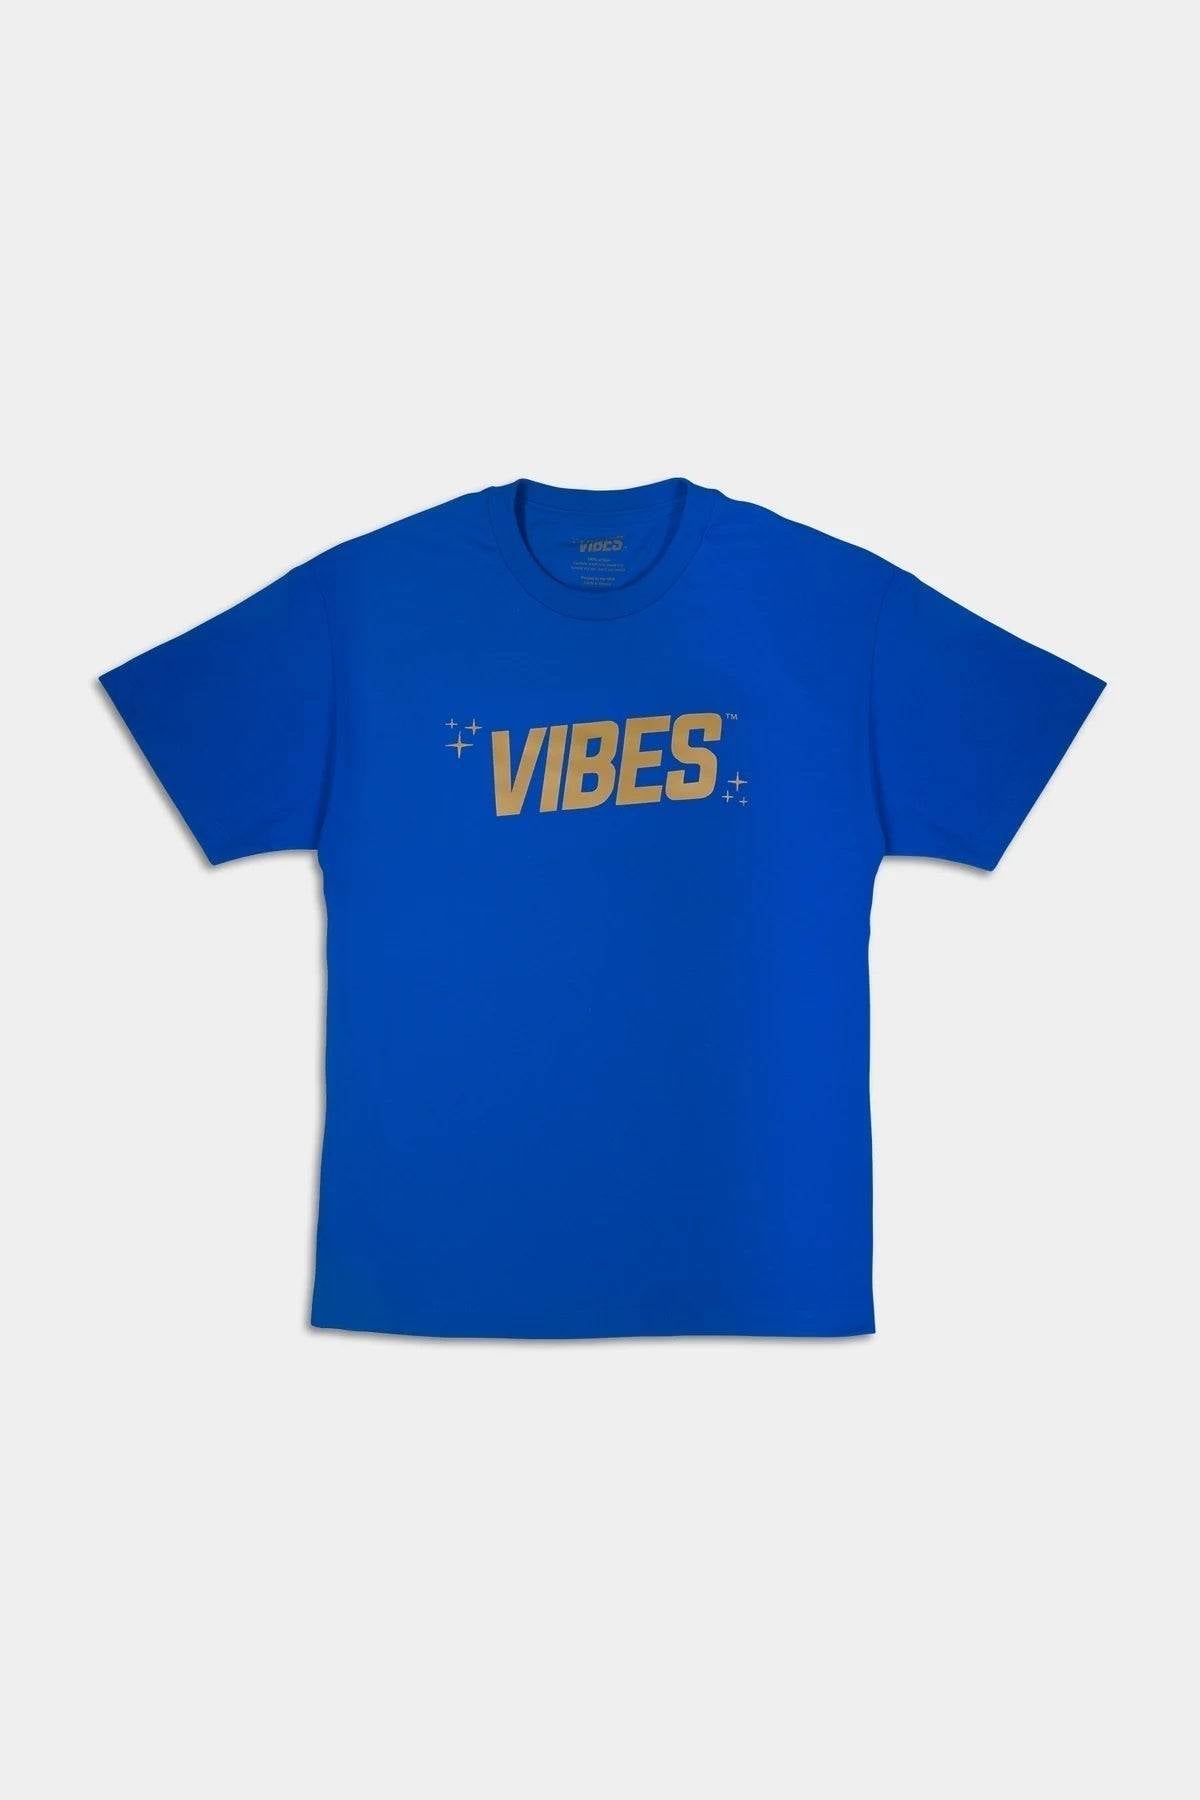 VIBES Blue With Gold Logo T-Shirt Small